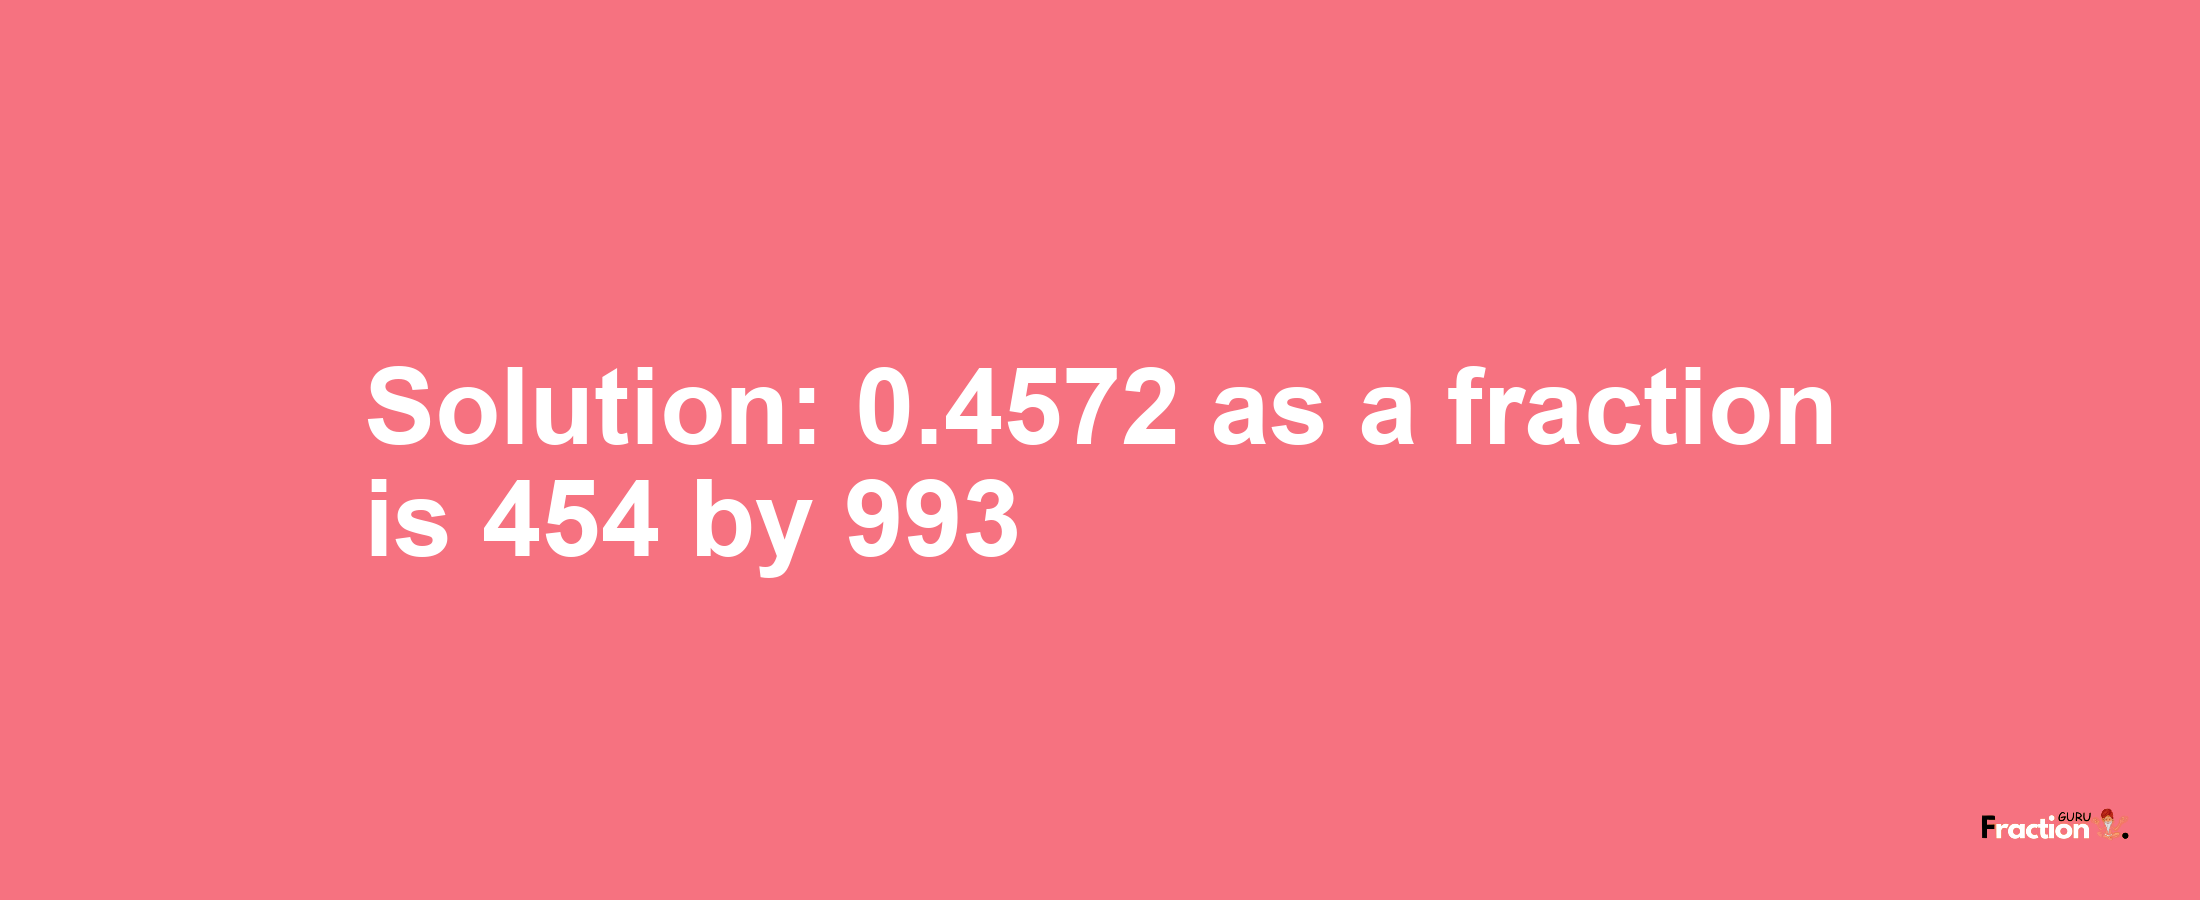 Solution:0.4572 as a fraction is 454/993